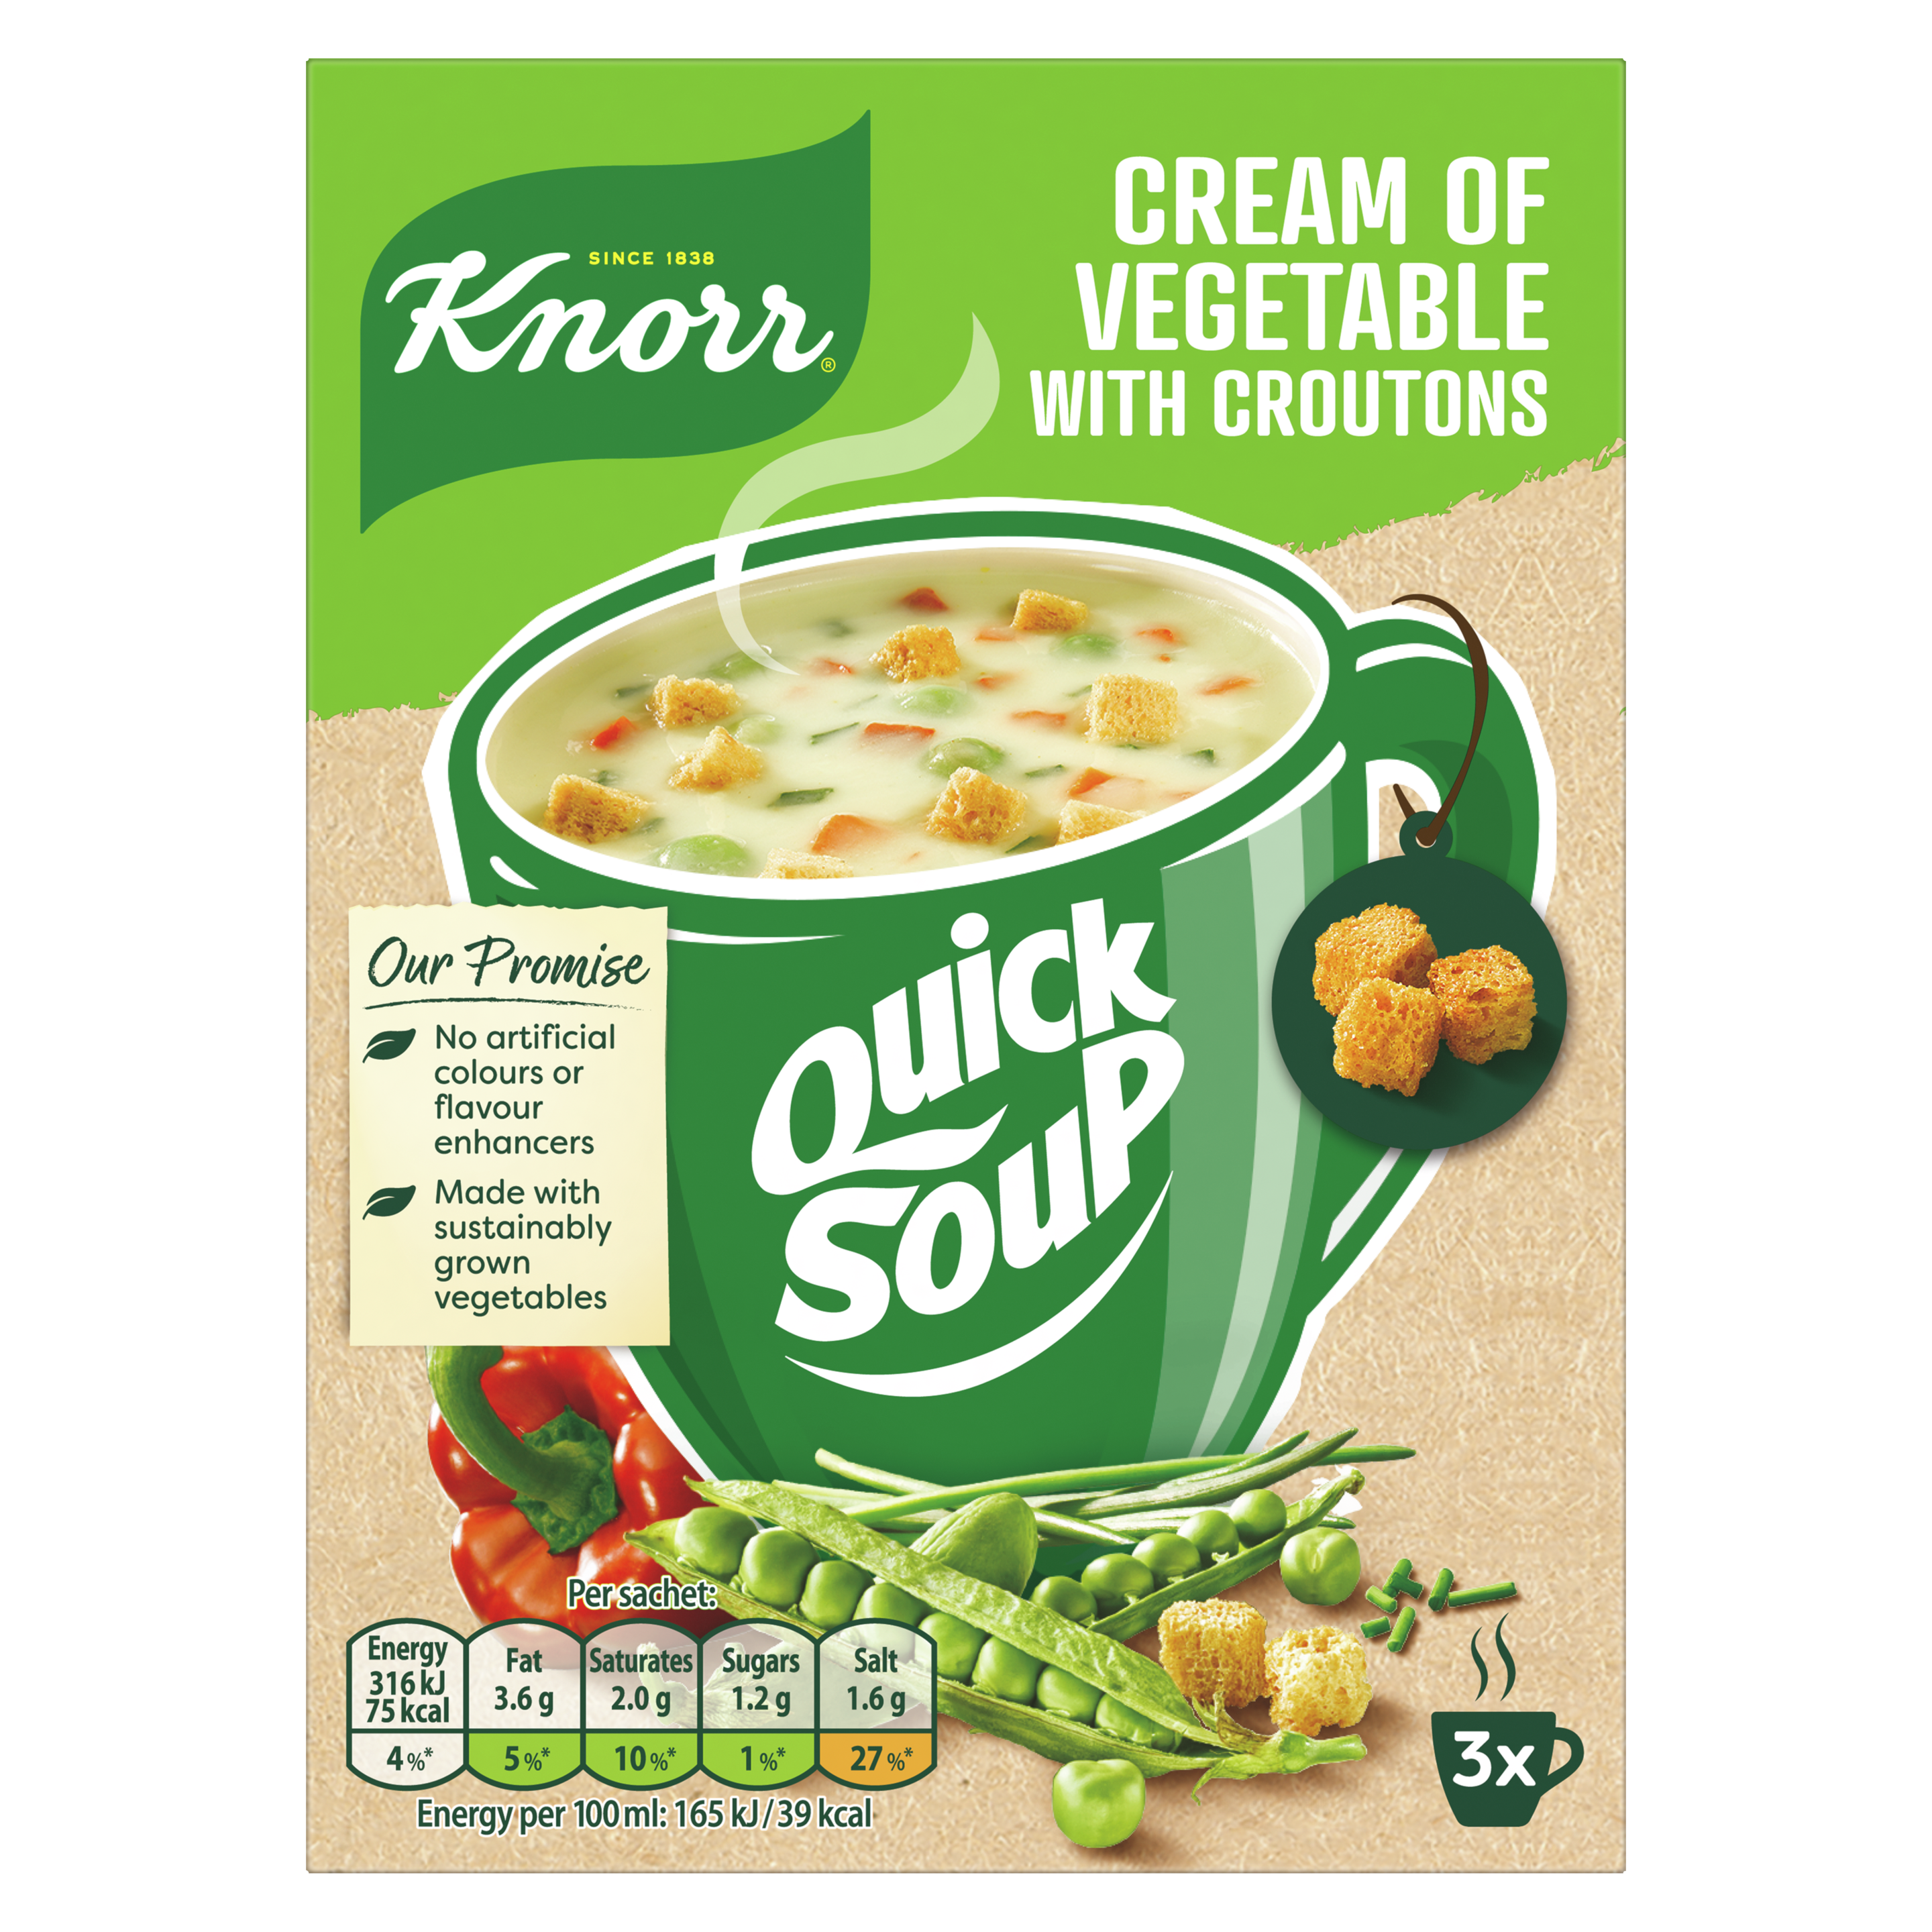 Quick Soup Cream of Vegetable with Croutons